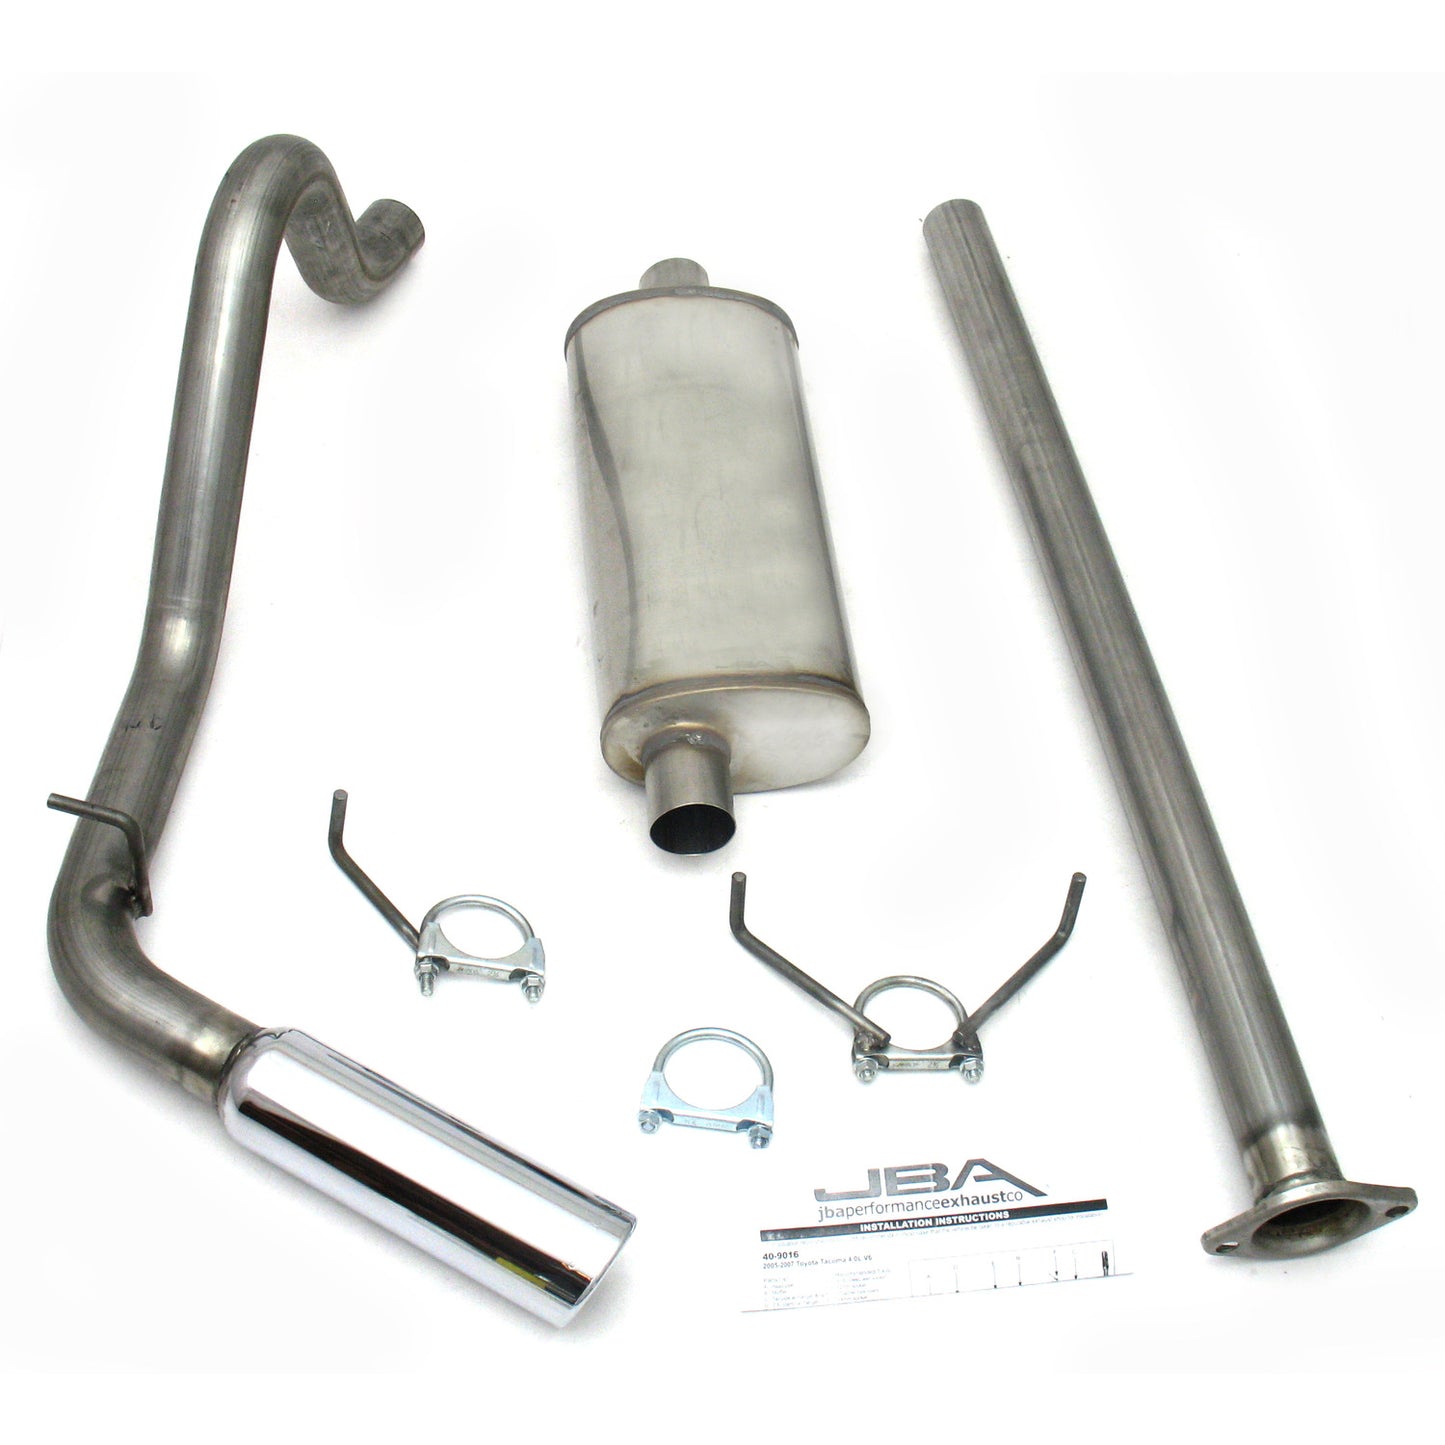 JBA Performance Exhaust 40-9016 2.5" Stainless Steel Exhaust System 05-12 Tacoma Access/Double Cab & Long Bed